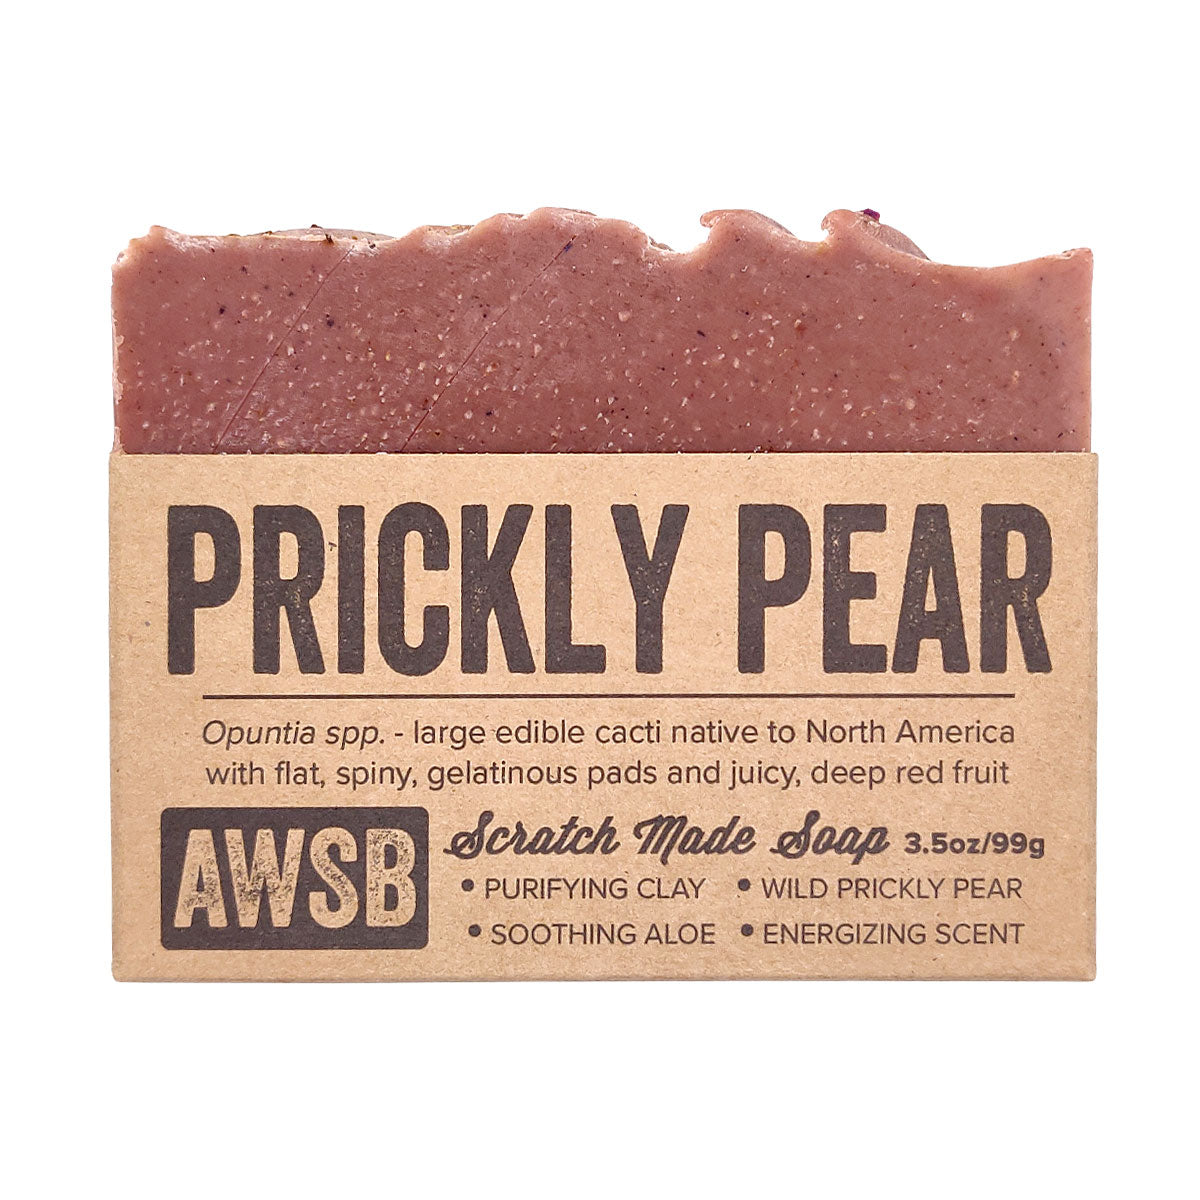 Prickly Pear Soap for sale, Soap Bar, Handmade Soaps, Clean Scent, Sustainable Skincare, Vegan Cruelty Free, Face And Body, Bath Beauty, Natural Gift